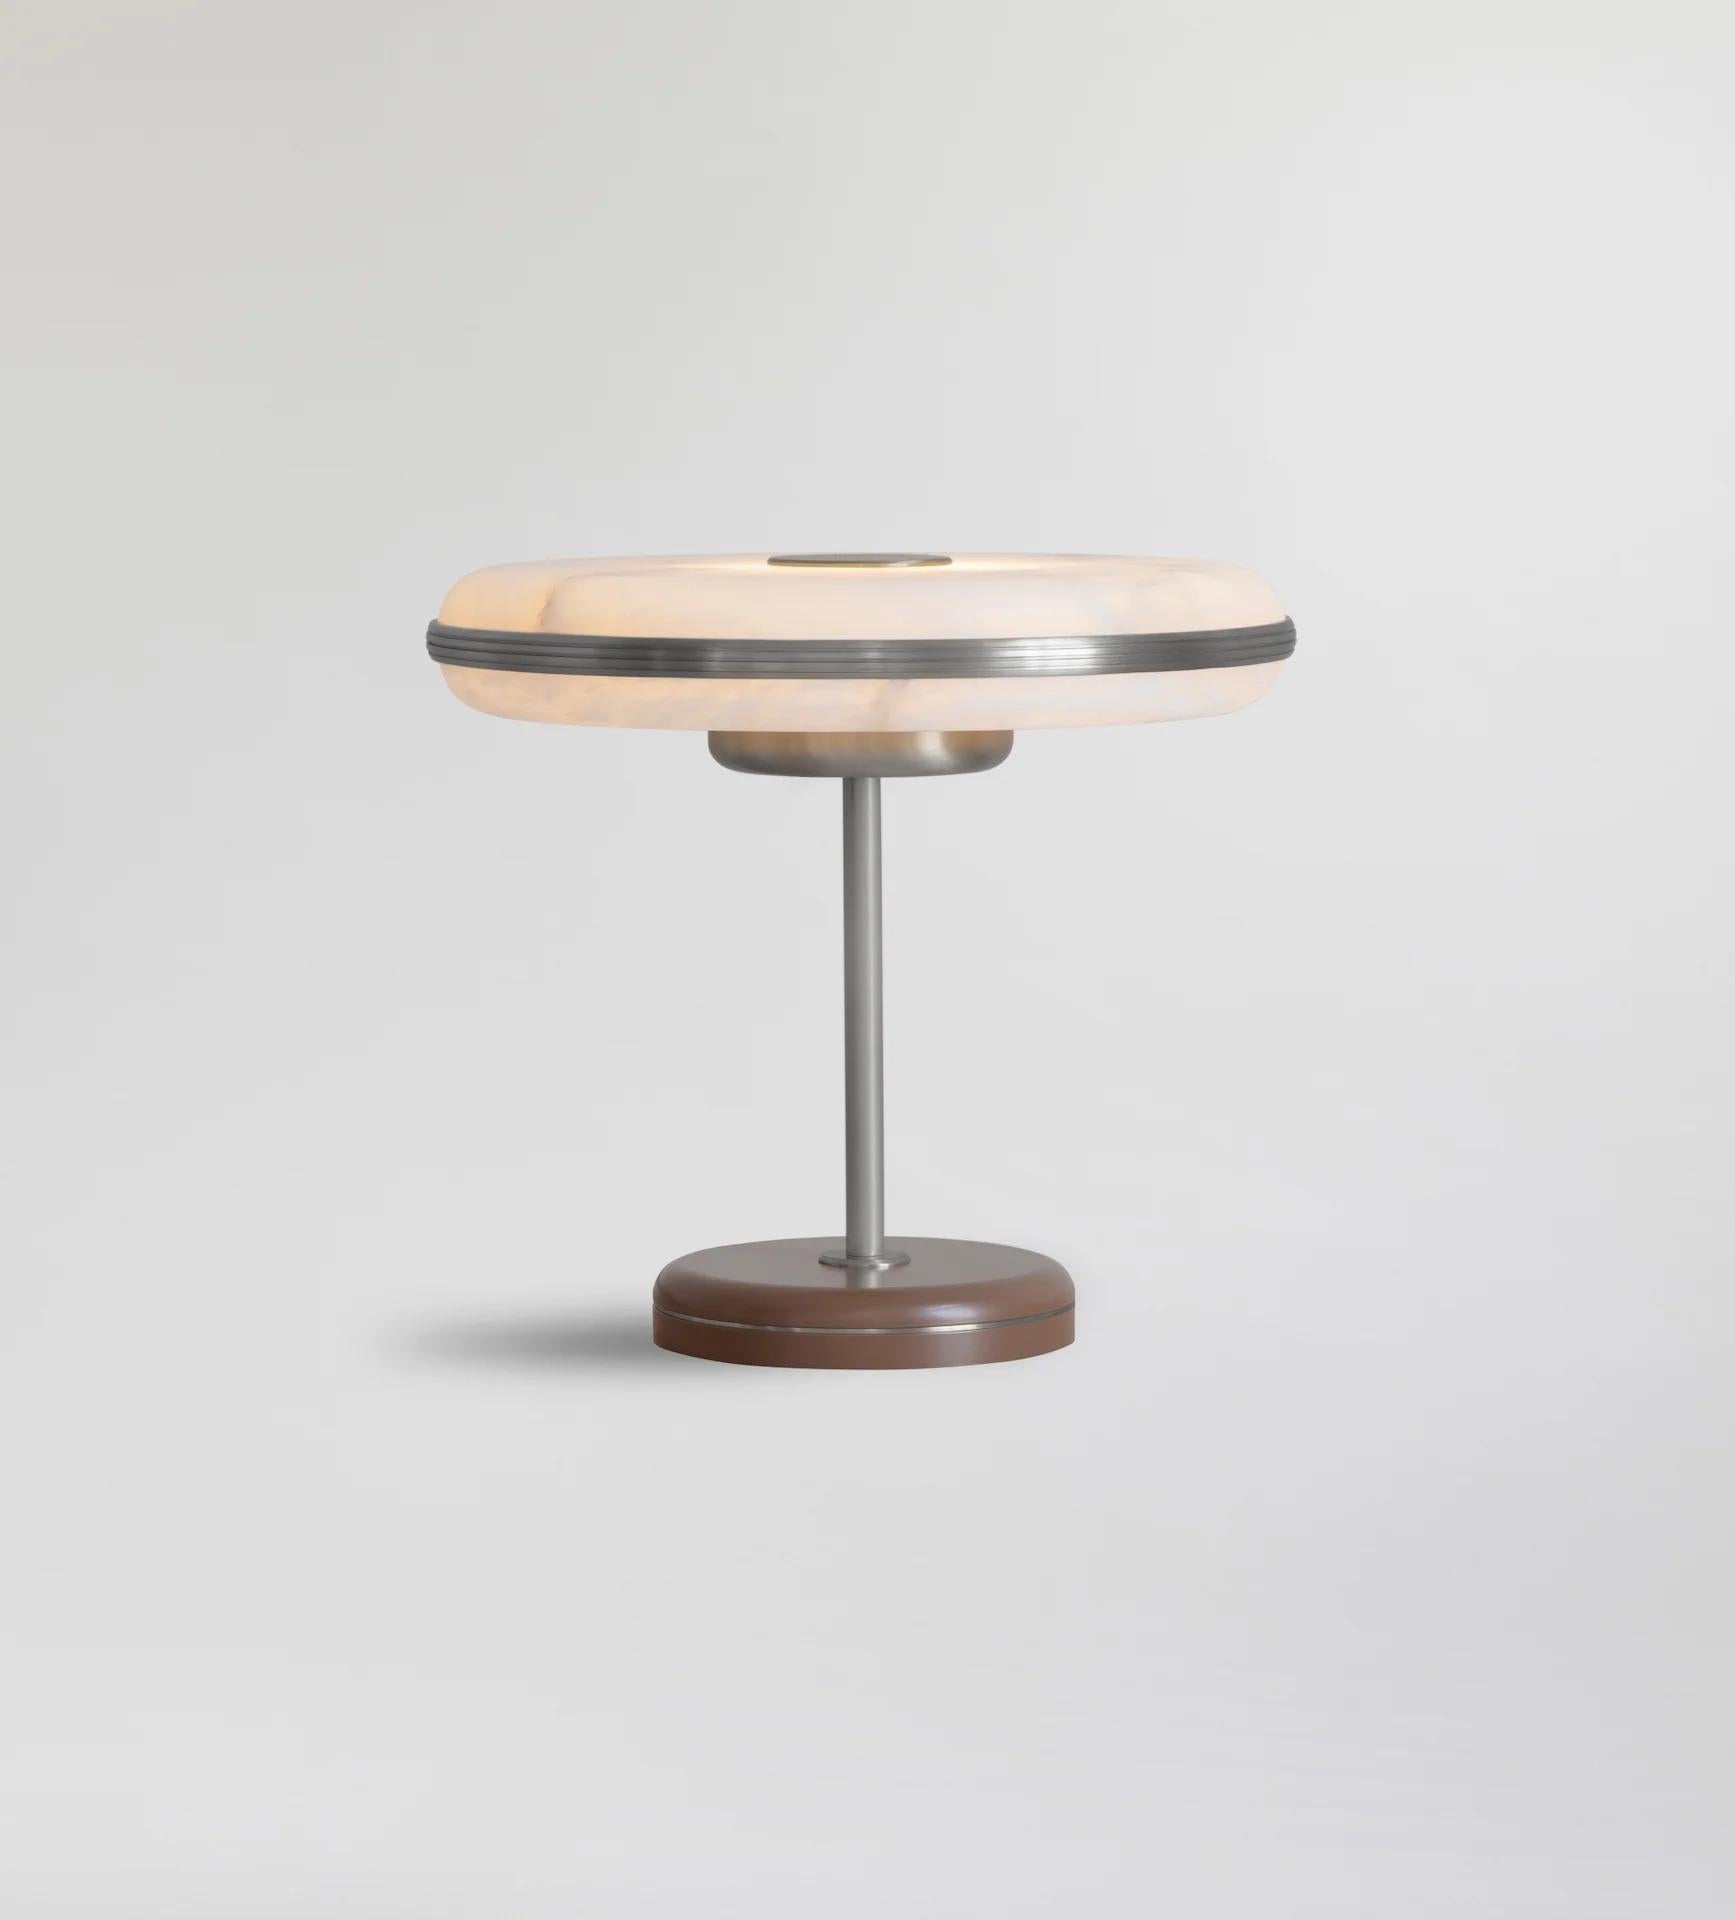 Beran Satin Nickel Large Table Lamp by Bert Frank
Dimensions: Ø 36 x H 32 cm.
Materials: Satin nickel and alabaster.
Base finish: Hazel.

Available in two different sizes. Available in different finishes and materials. Please contact us. 

The